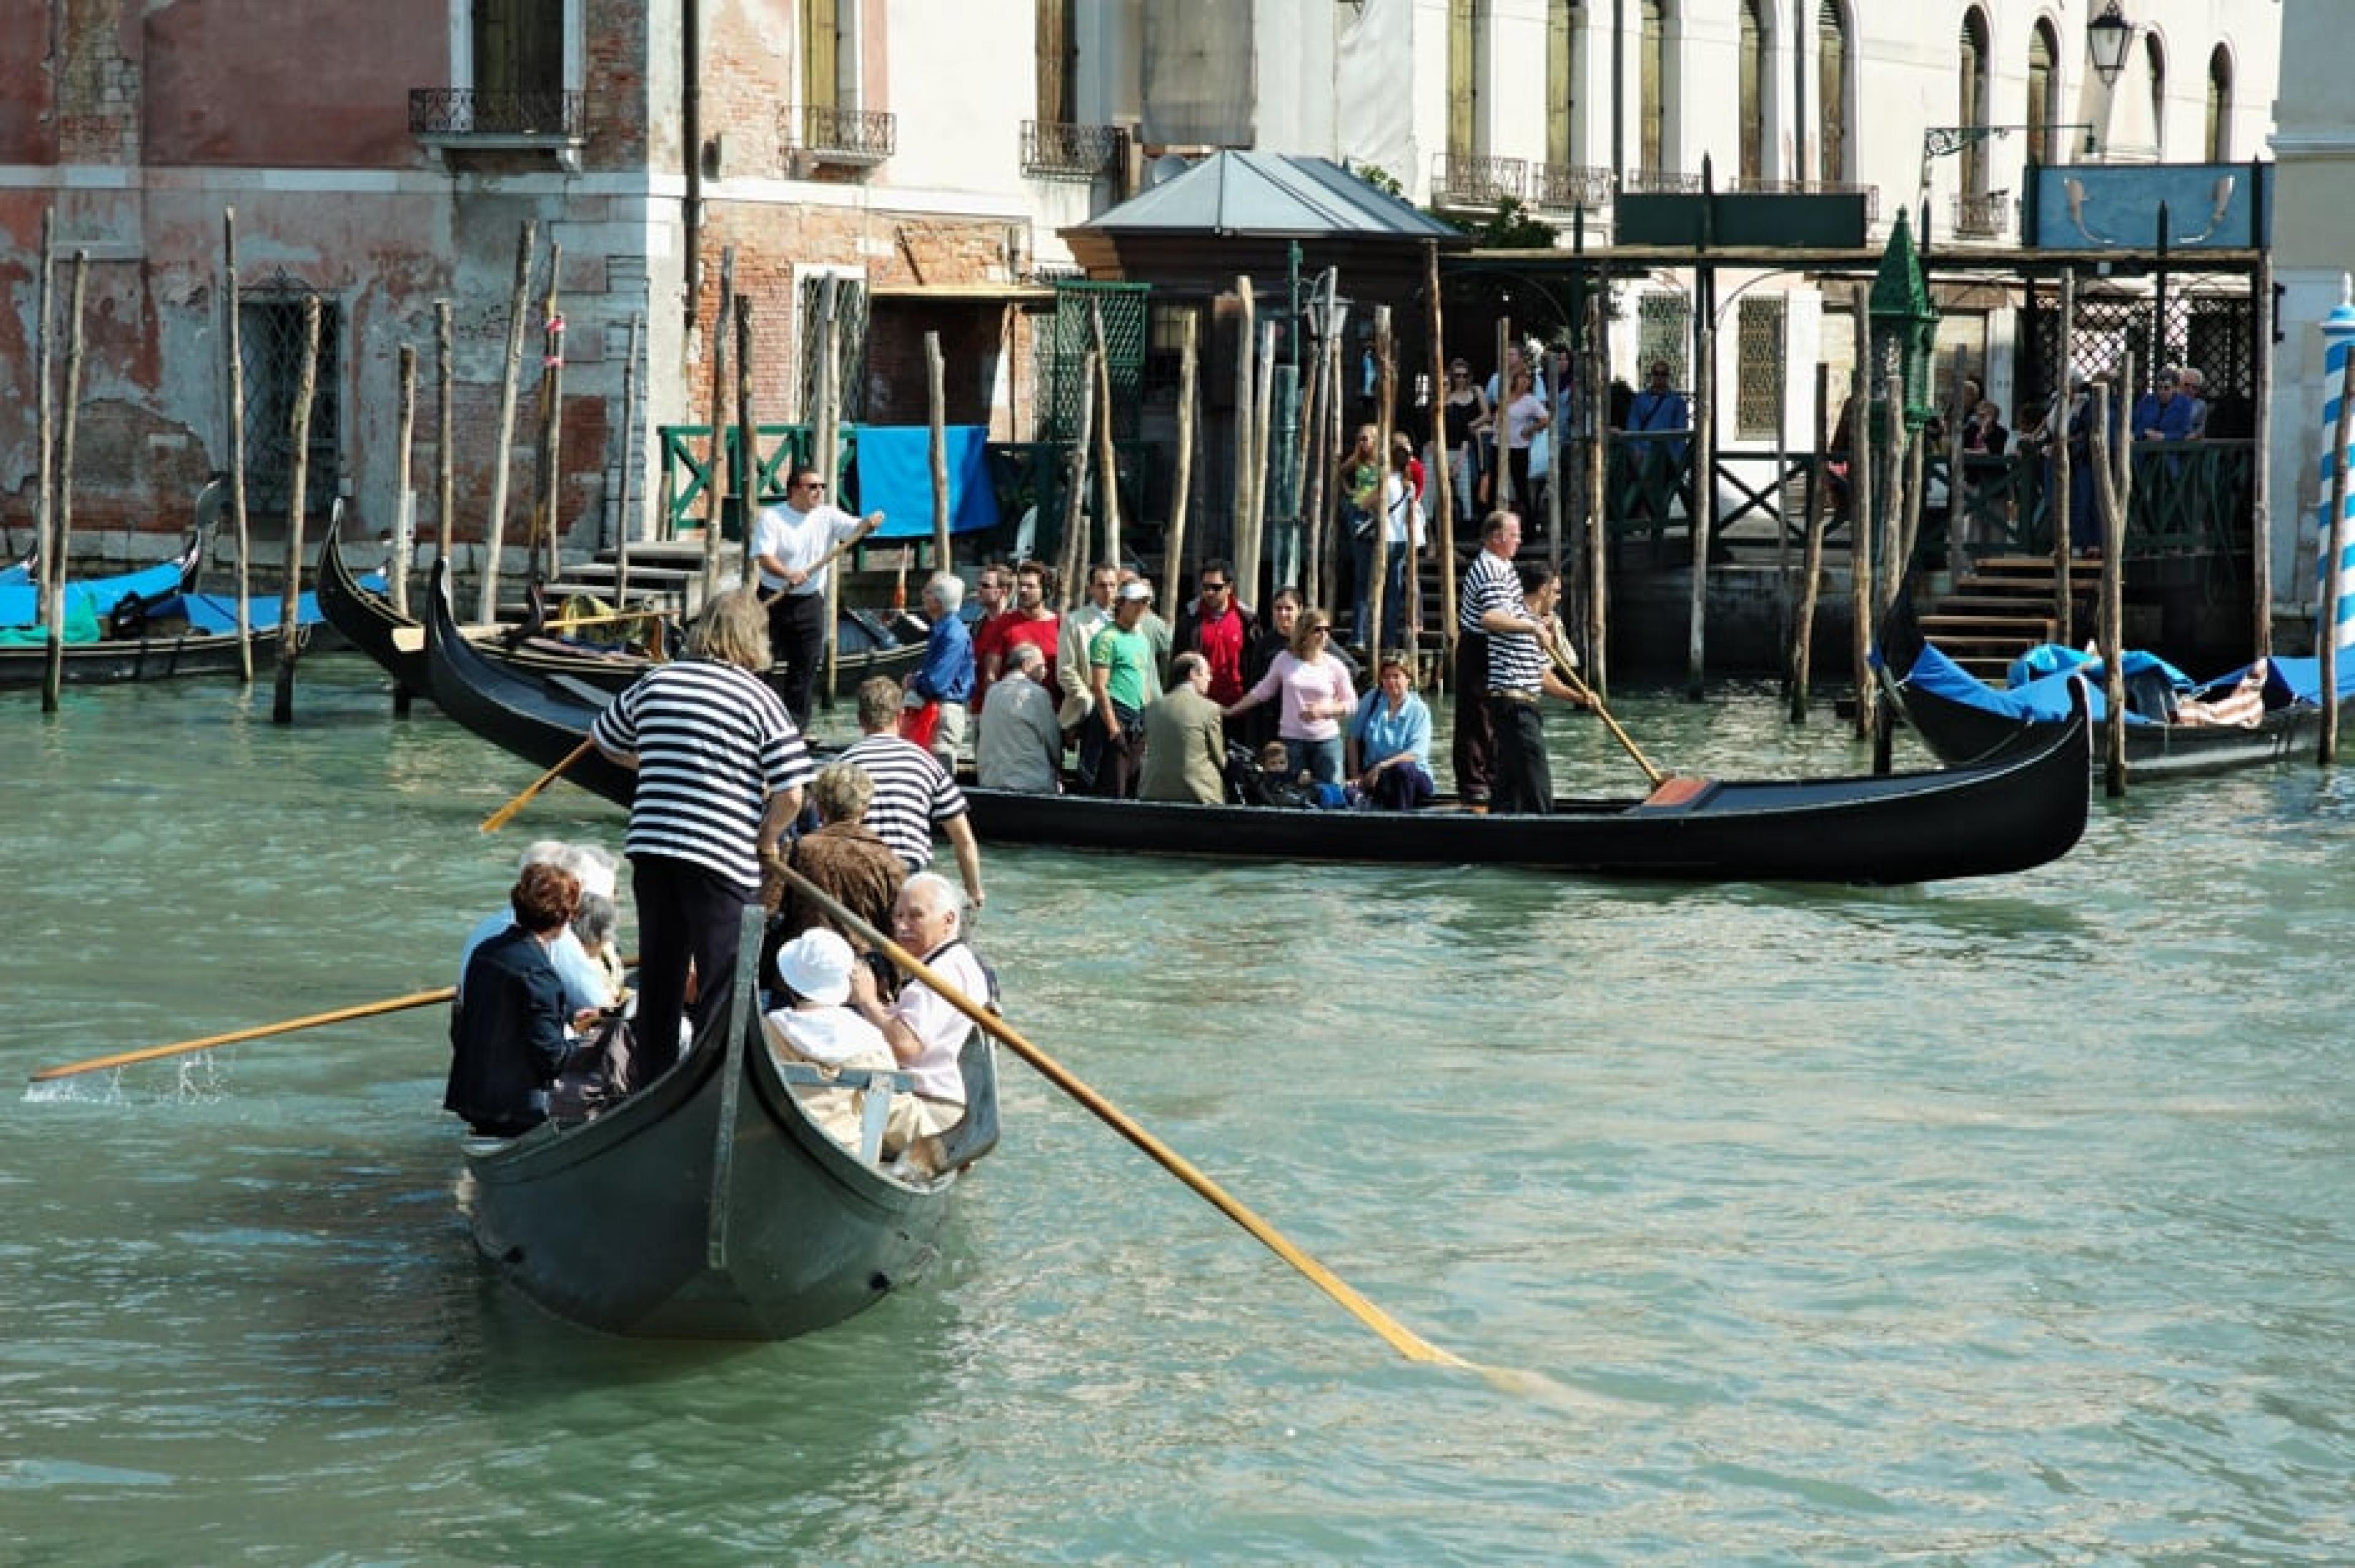 Aerial View - Indagare Tours: Venetian Rowing Lesson,Venice, Italy - Courtesy Gary Houston